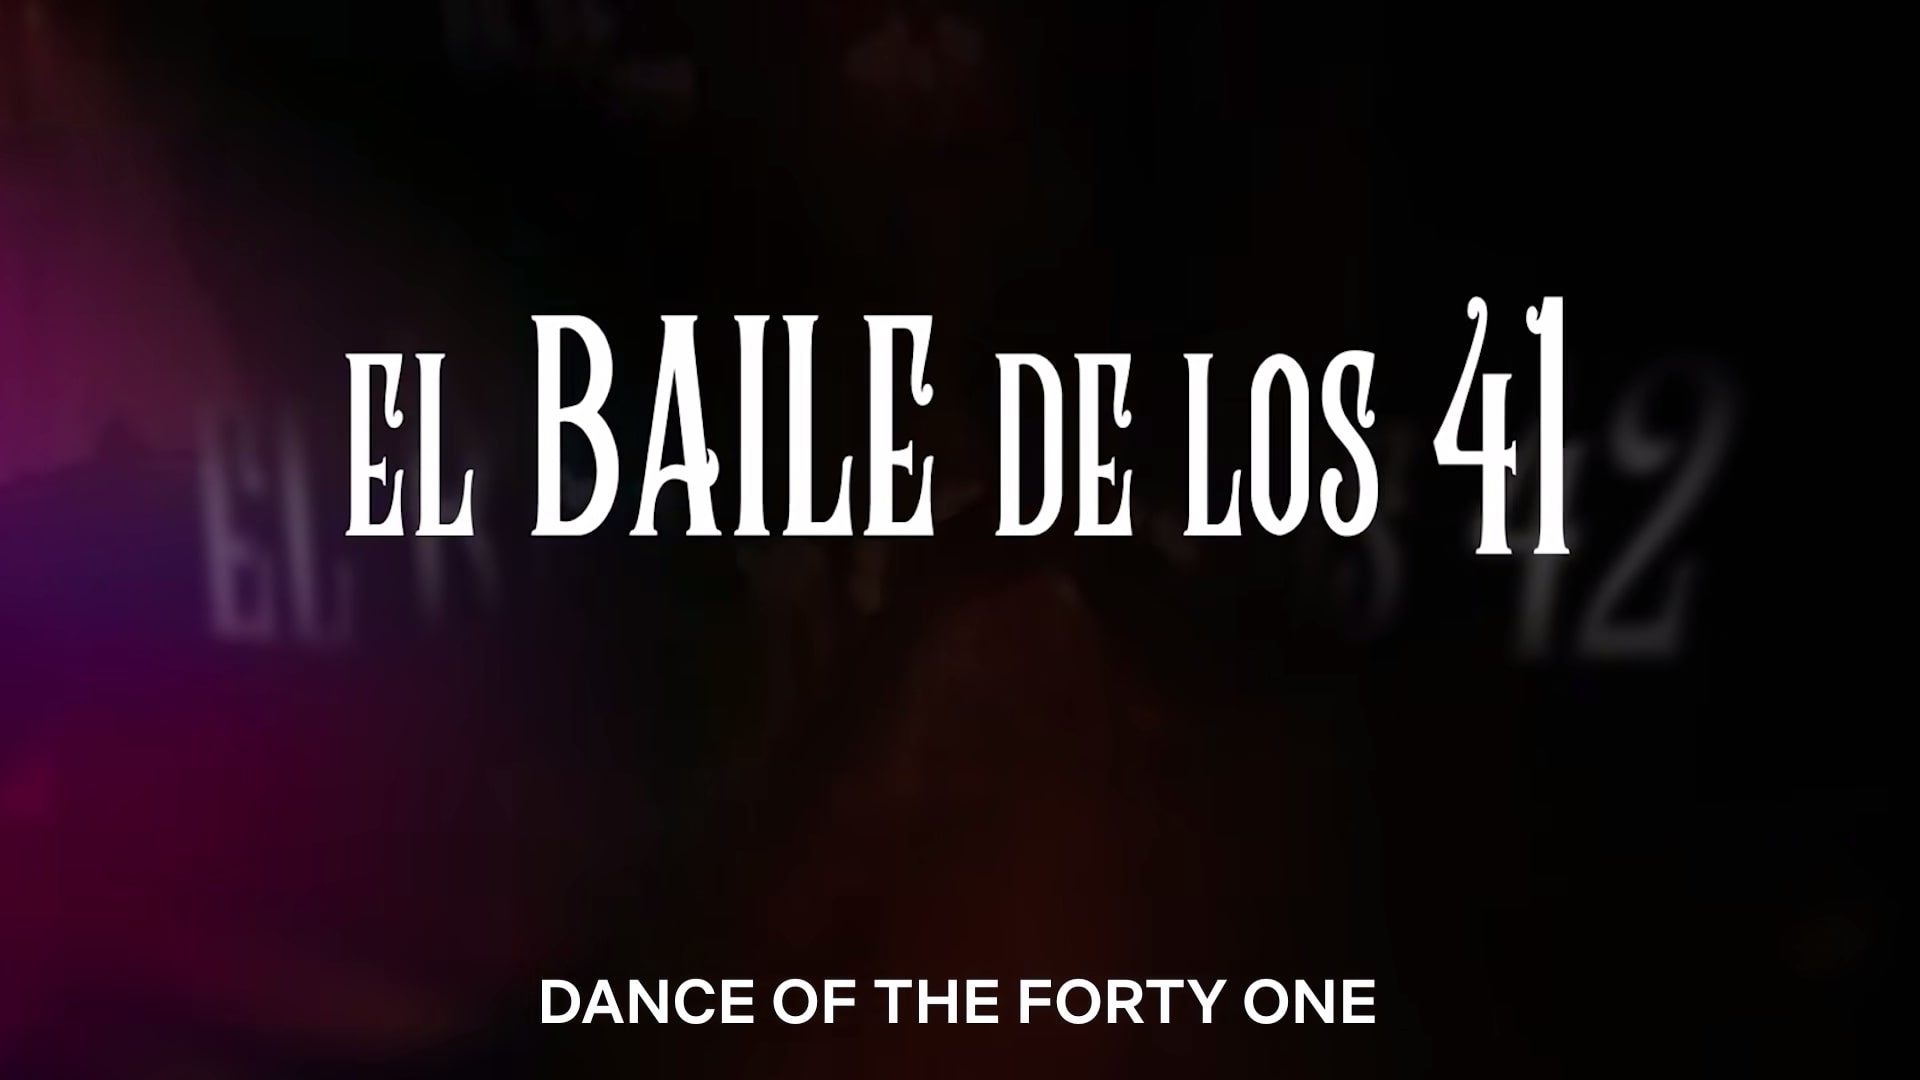 Netflix Dance of the 41 Trailer, Netflix Historical Dramas, Coming to Netflix in May 2021